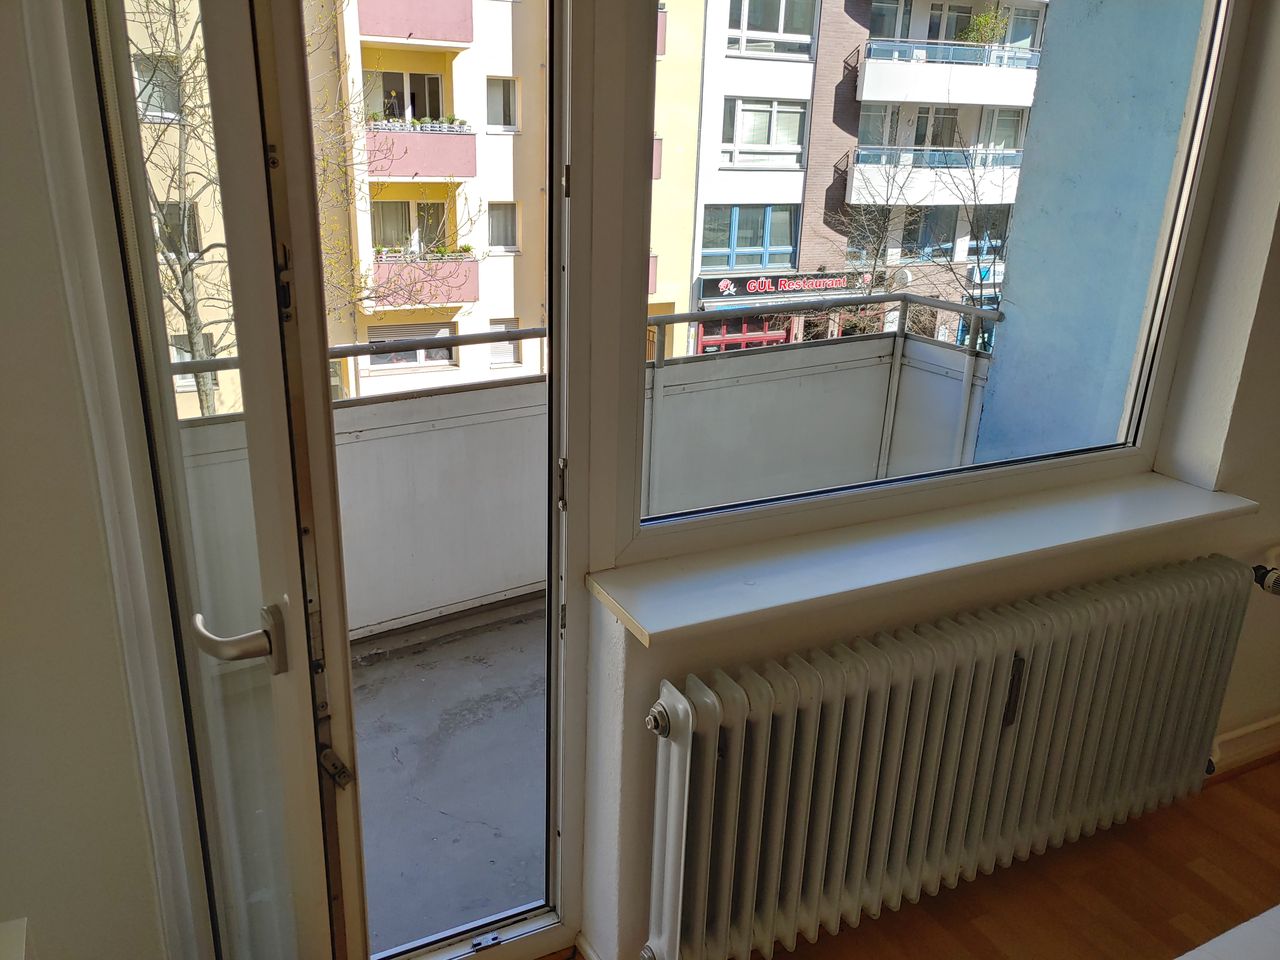 2 bdr apartment, suitable as a shared apartment, great location, good public transportation, shopping street, etc.